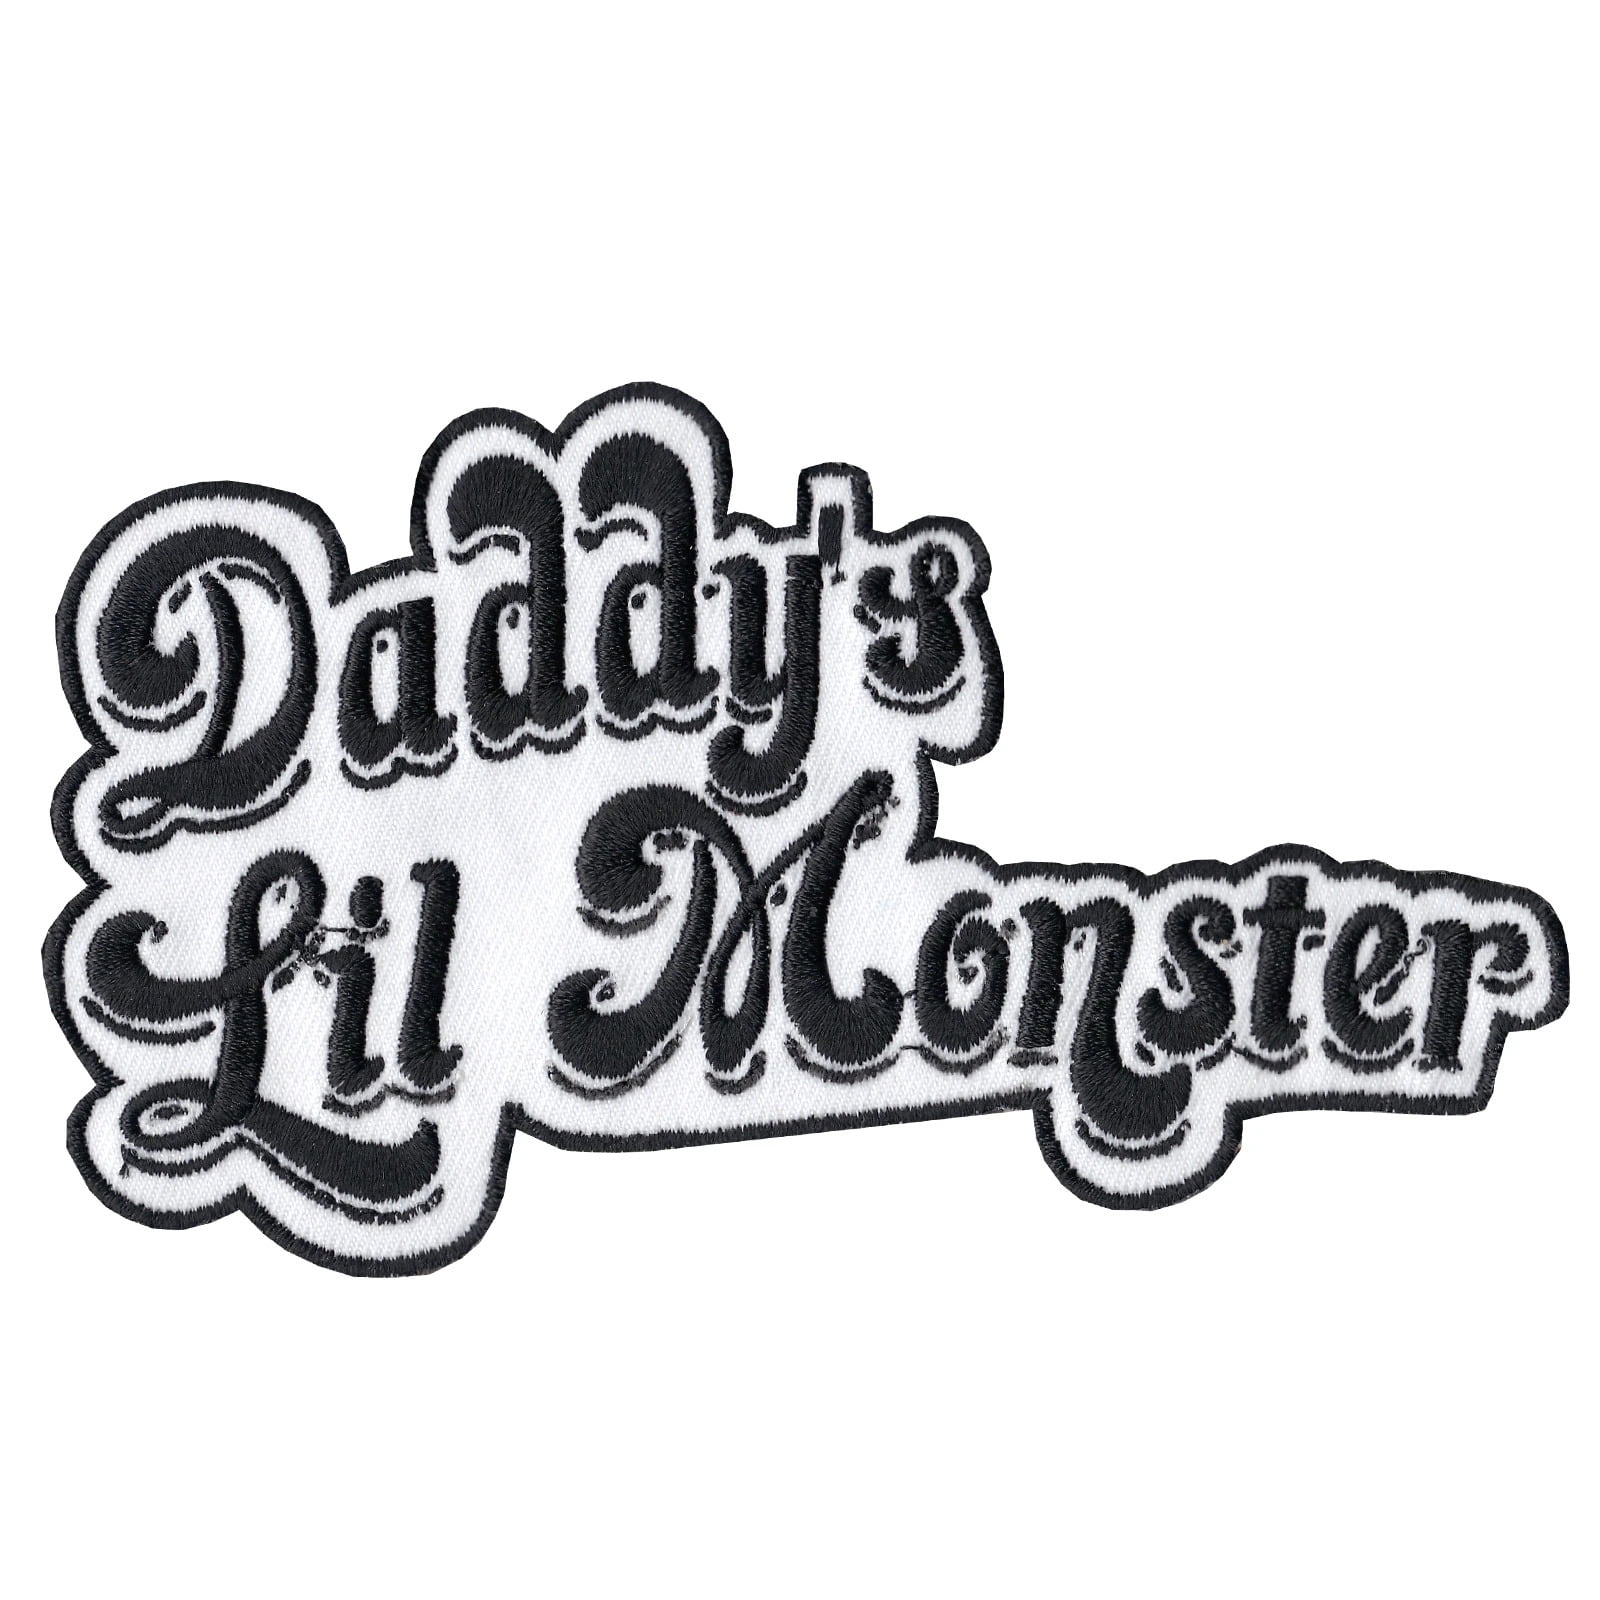 Monster daddys little Free Daddy